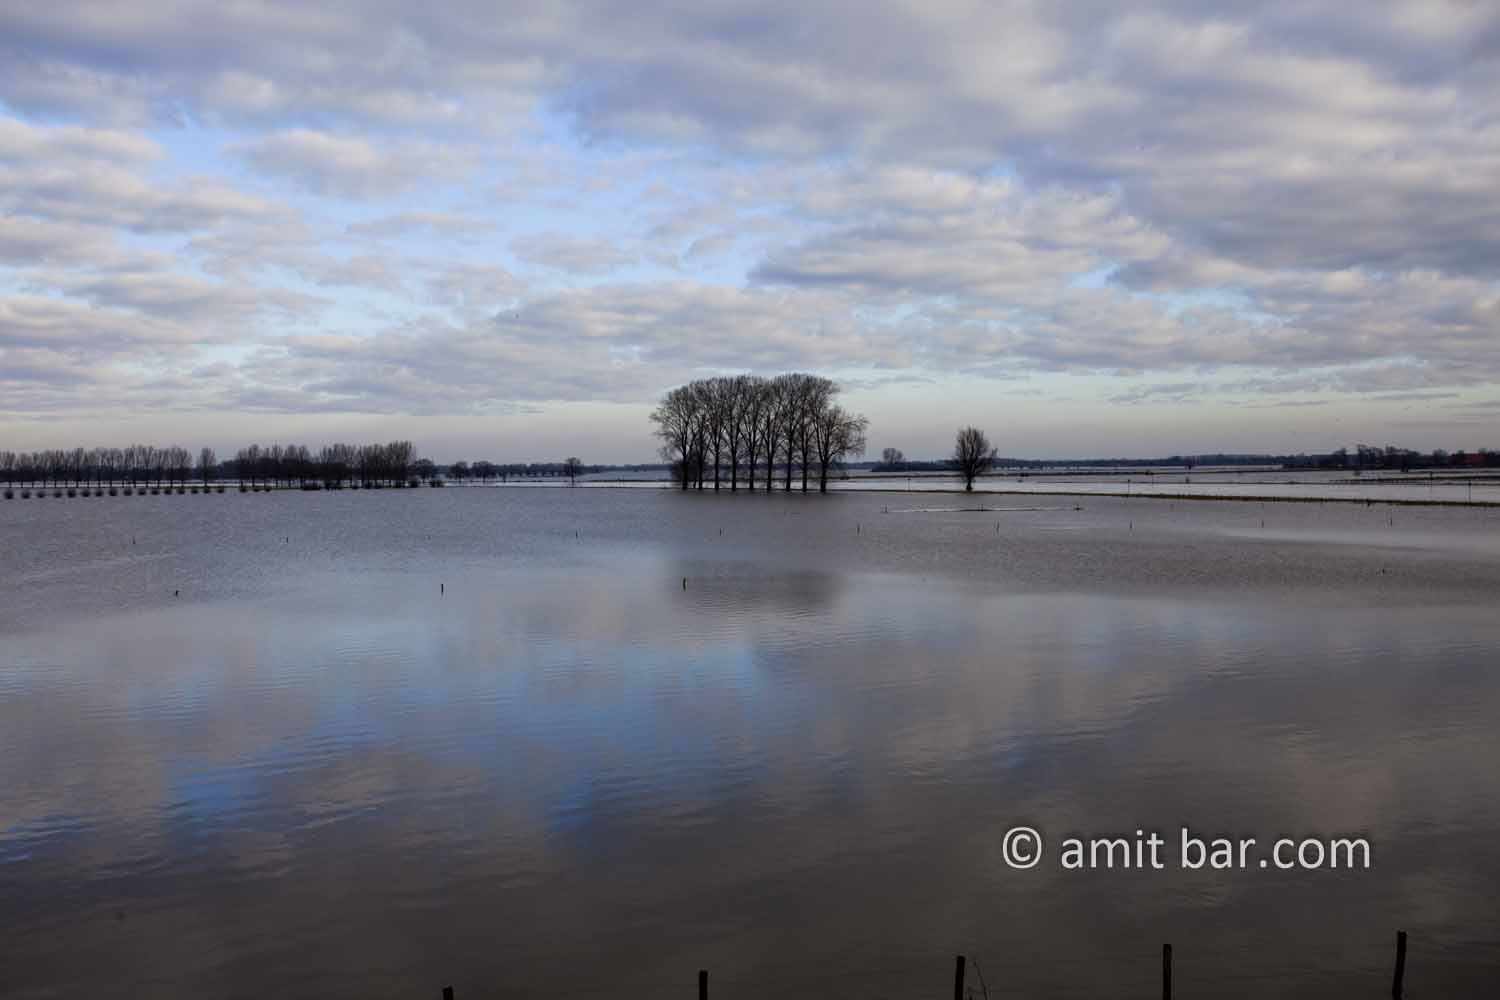 Reflections in flooded river: Reflections in flooded river at Doesburg, the Netherlands